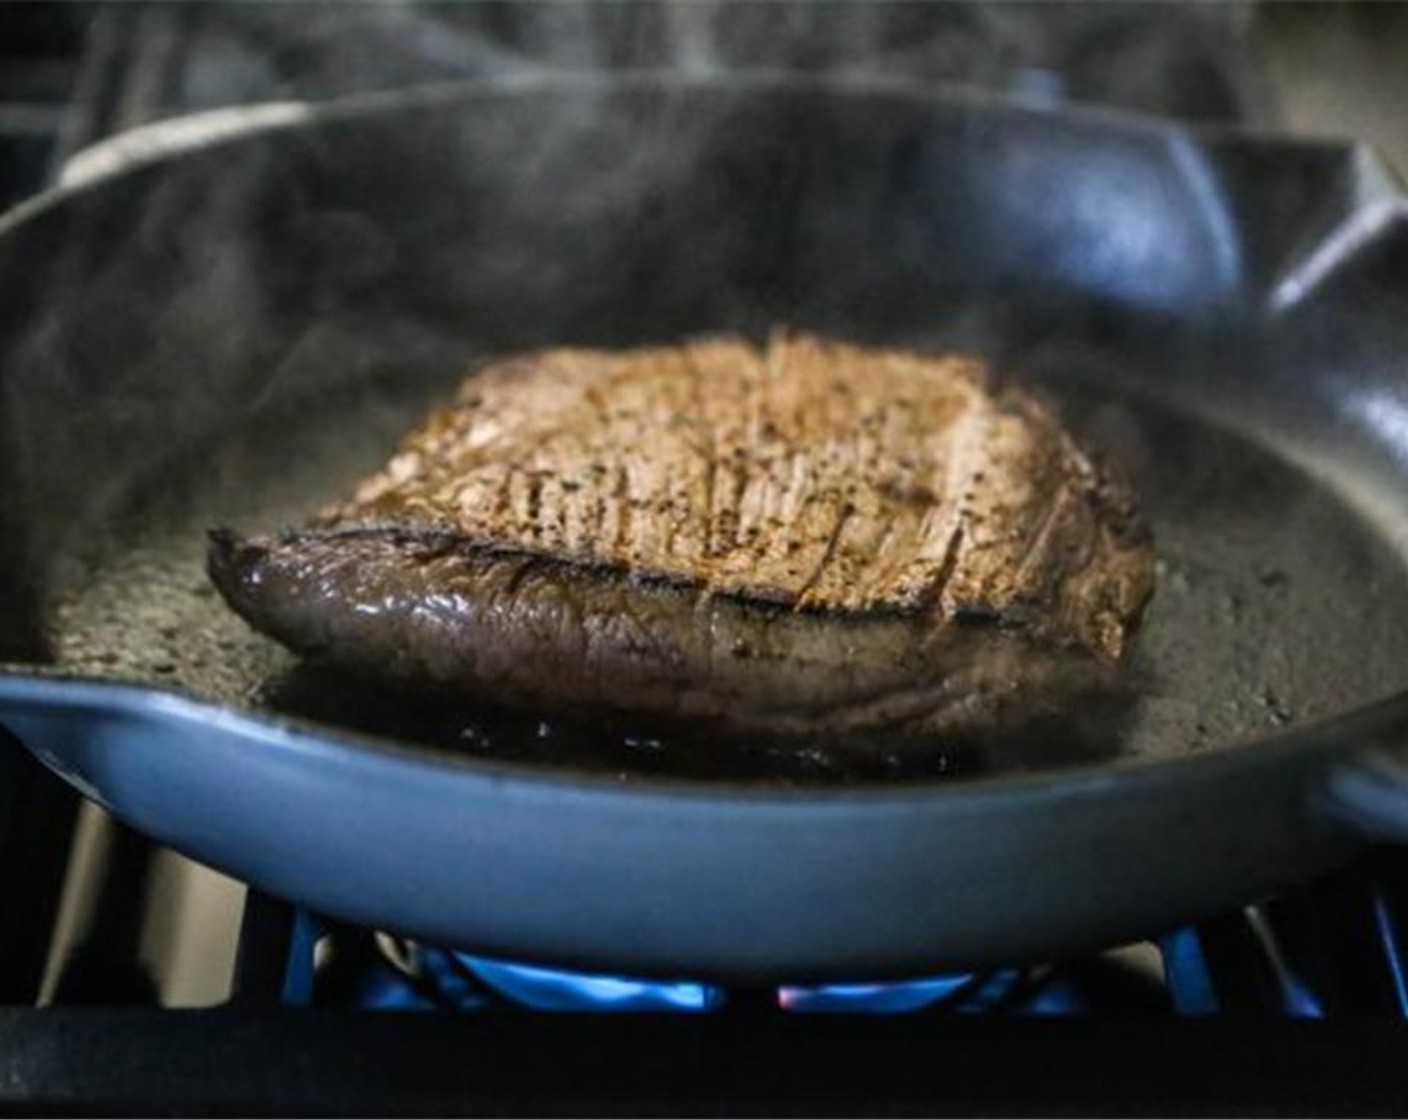 step 4 Preheat a grill to medium-high heat. Cook the steak about 5-6 minutes on the first side, flip, and cook for additional 3-4 minutes or until slightly pink in the middle. Remove from heat and set aside to rest before slicing into strips.